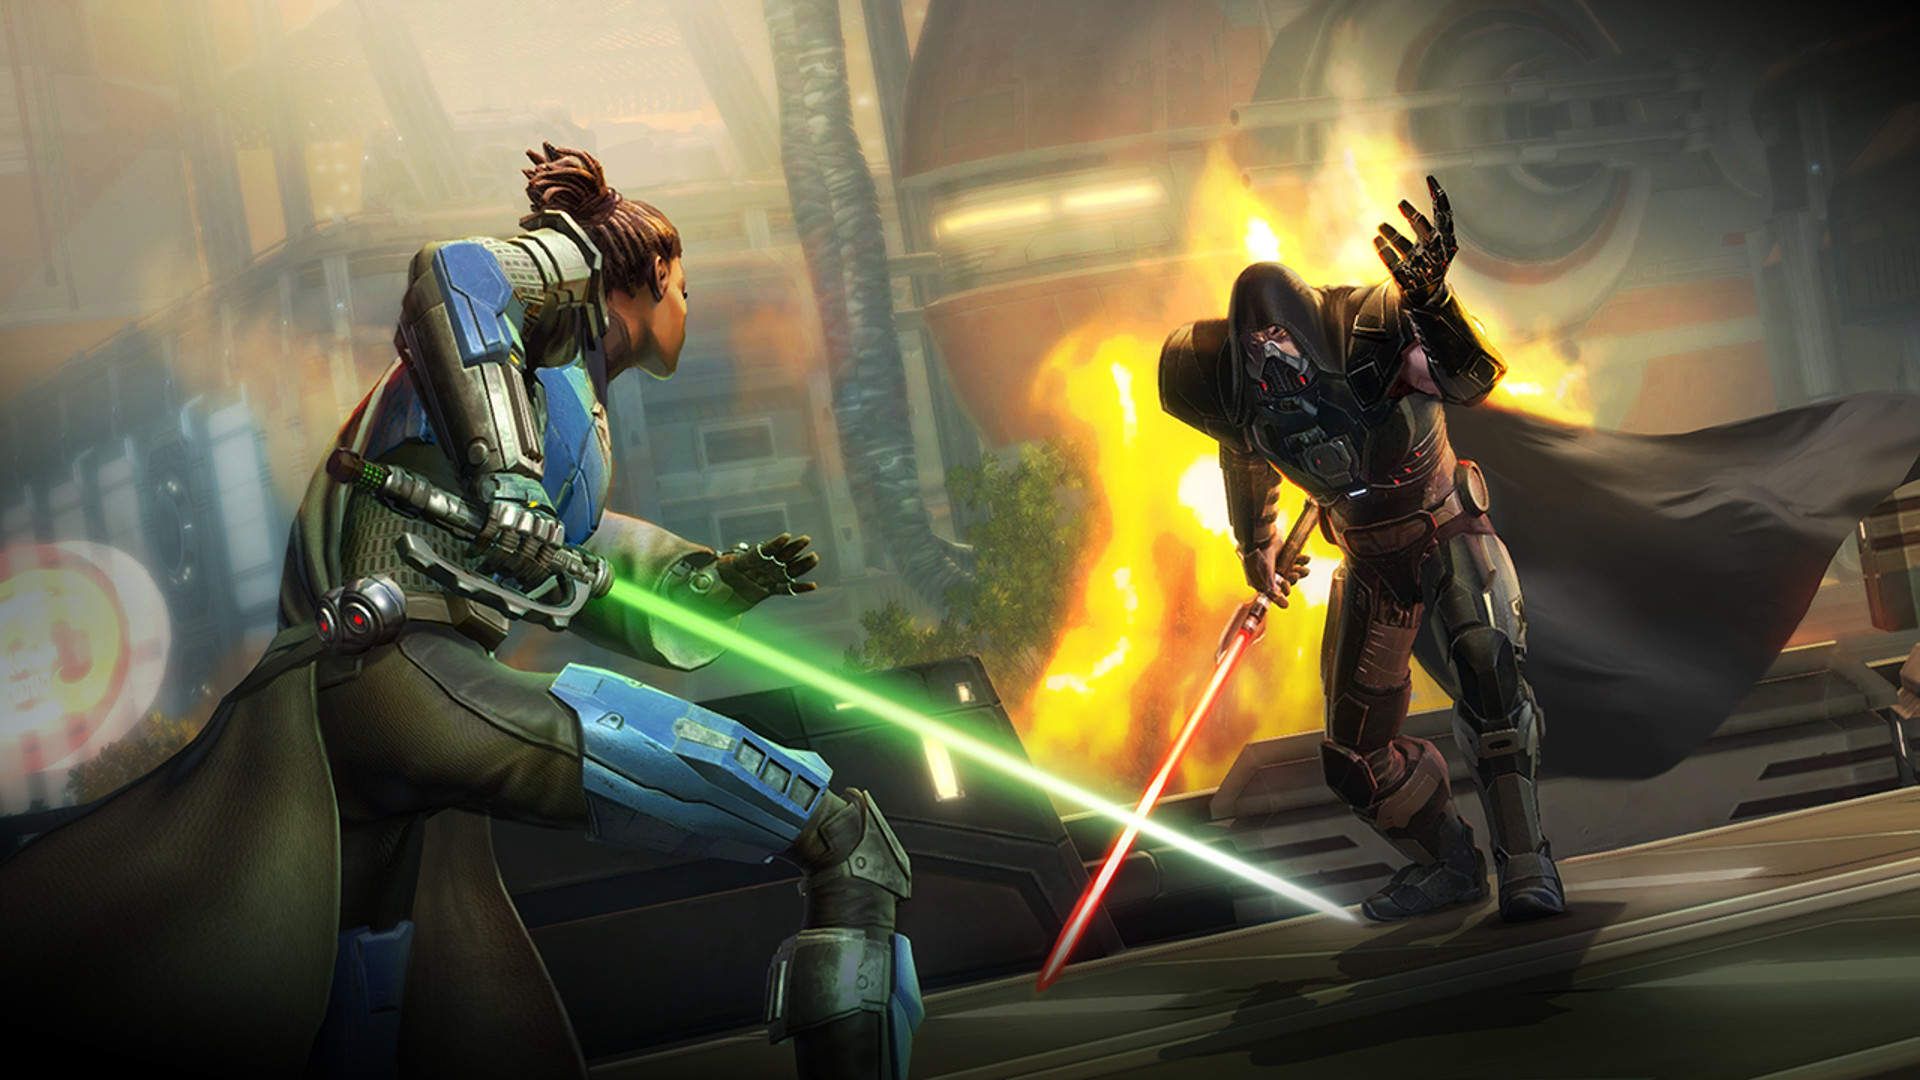 Why A Star Wars Video Game Potentially Establishing